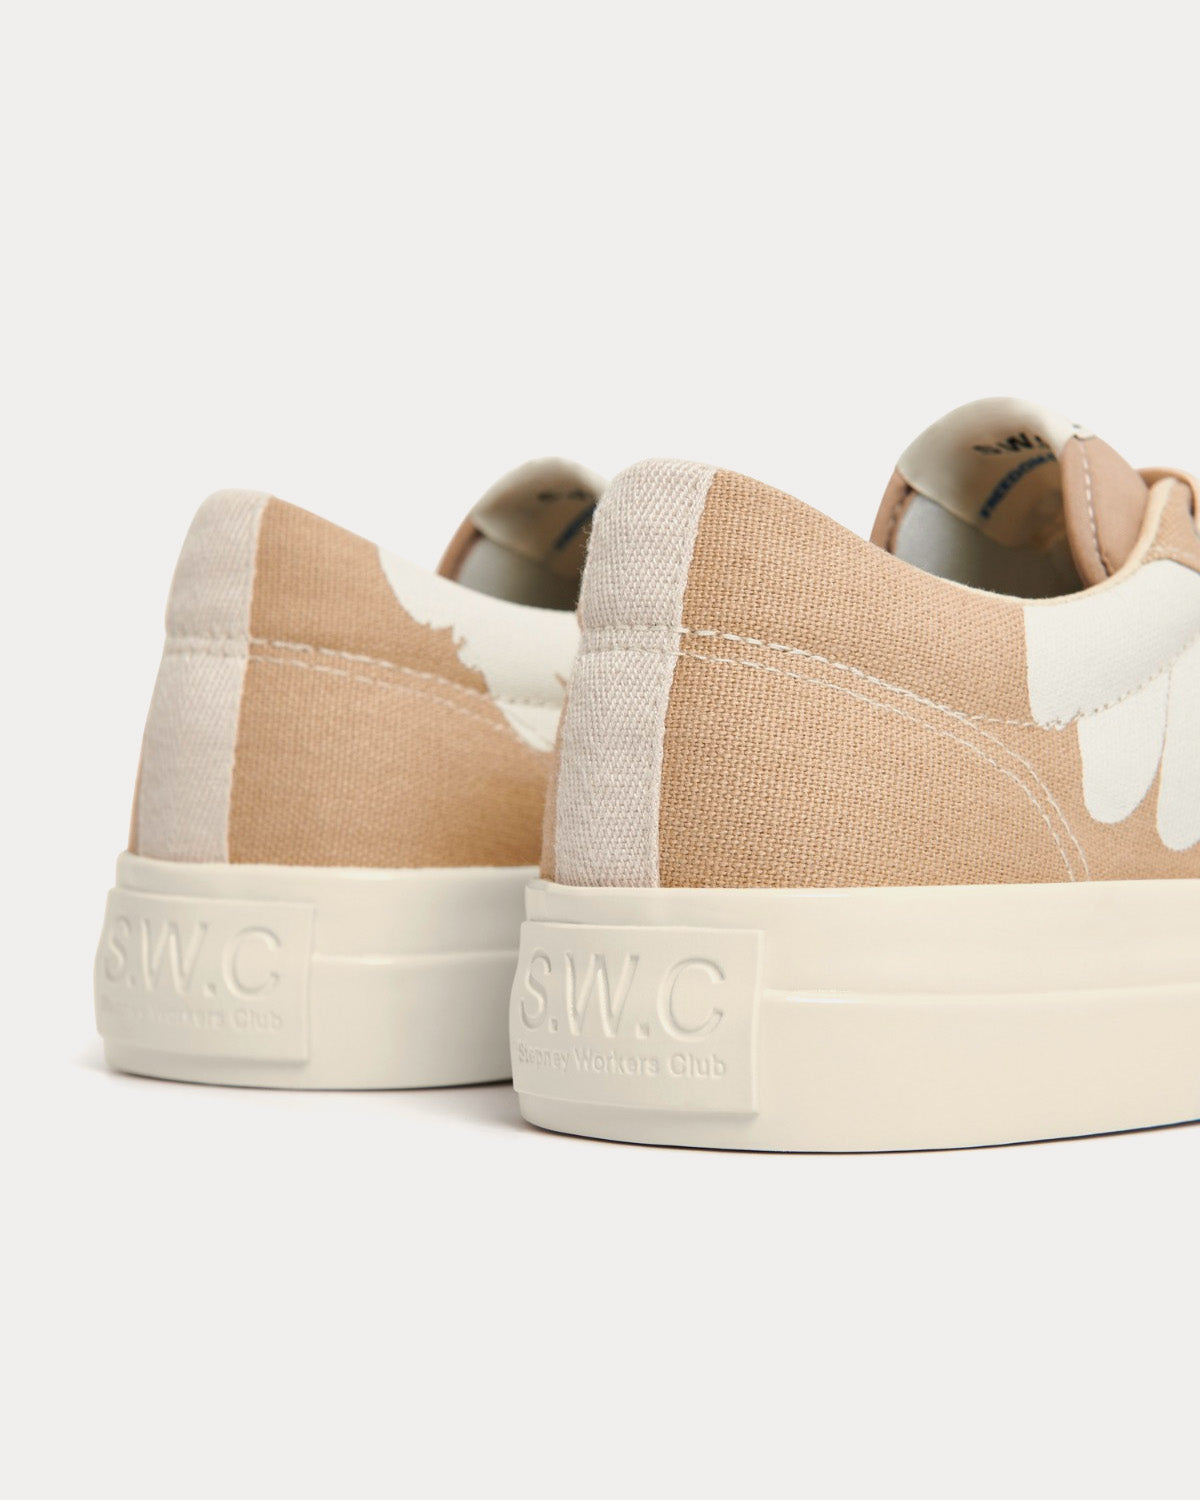 Stepney Workers Club - Dellow Shroom Hands Sand / White Low Top Sneakers